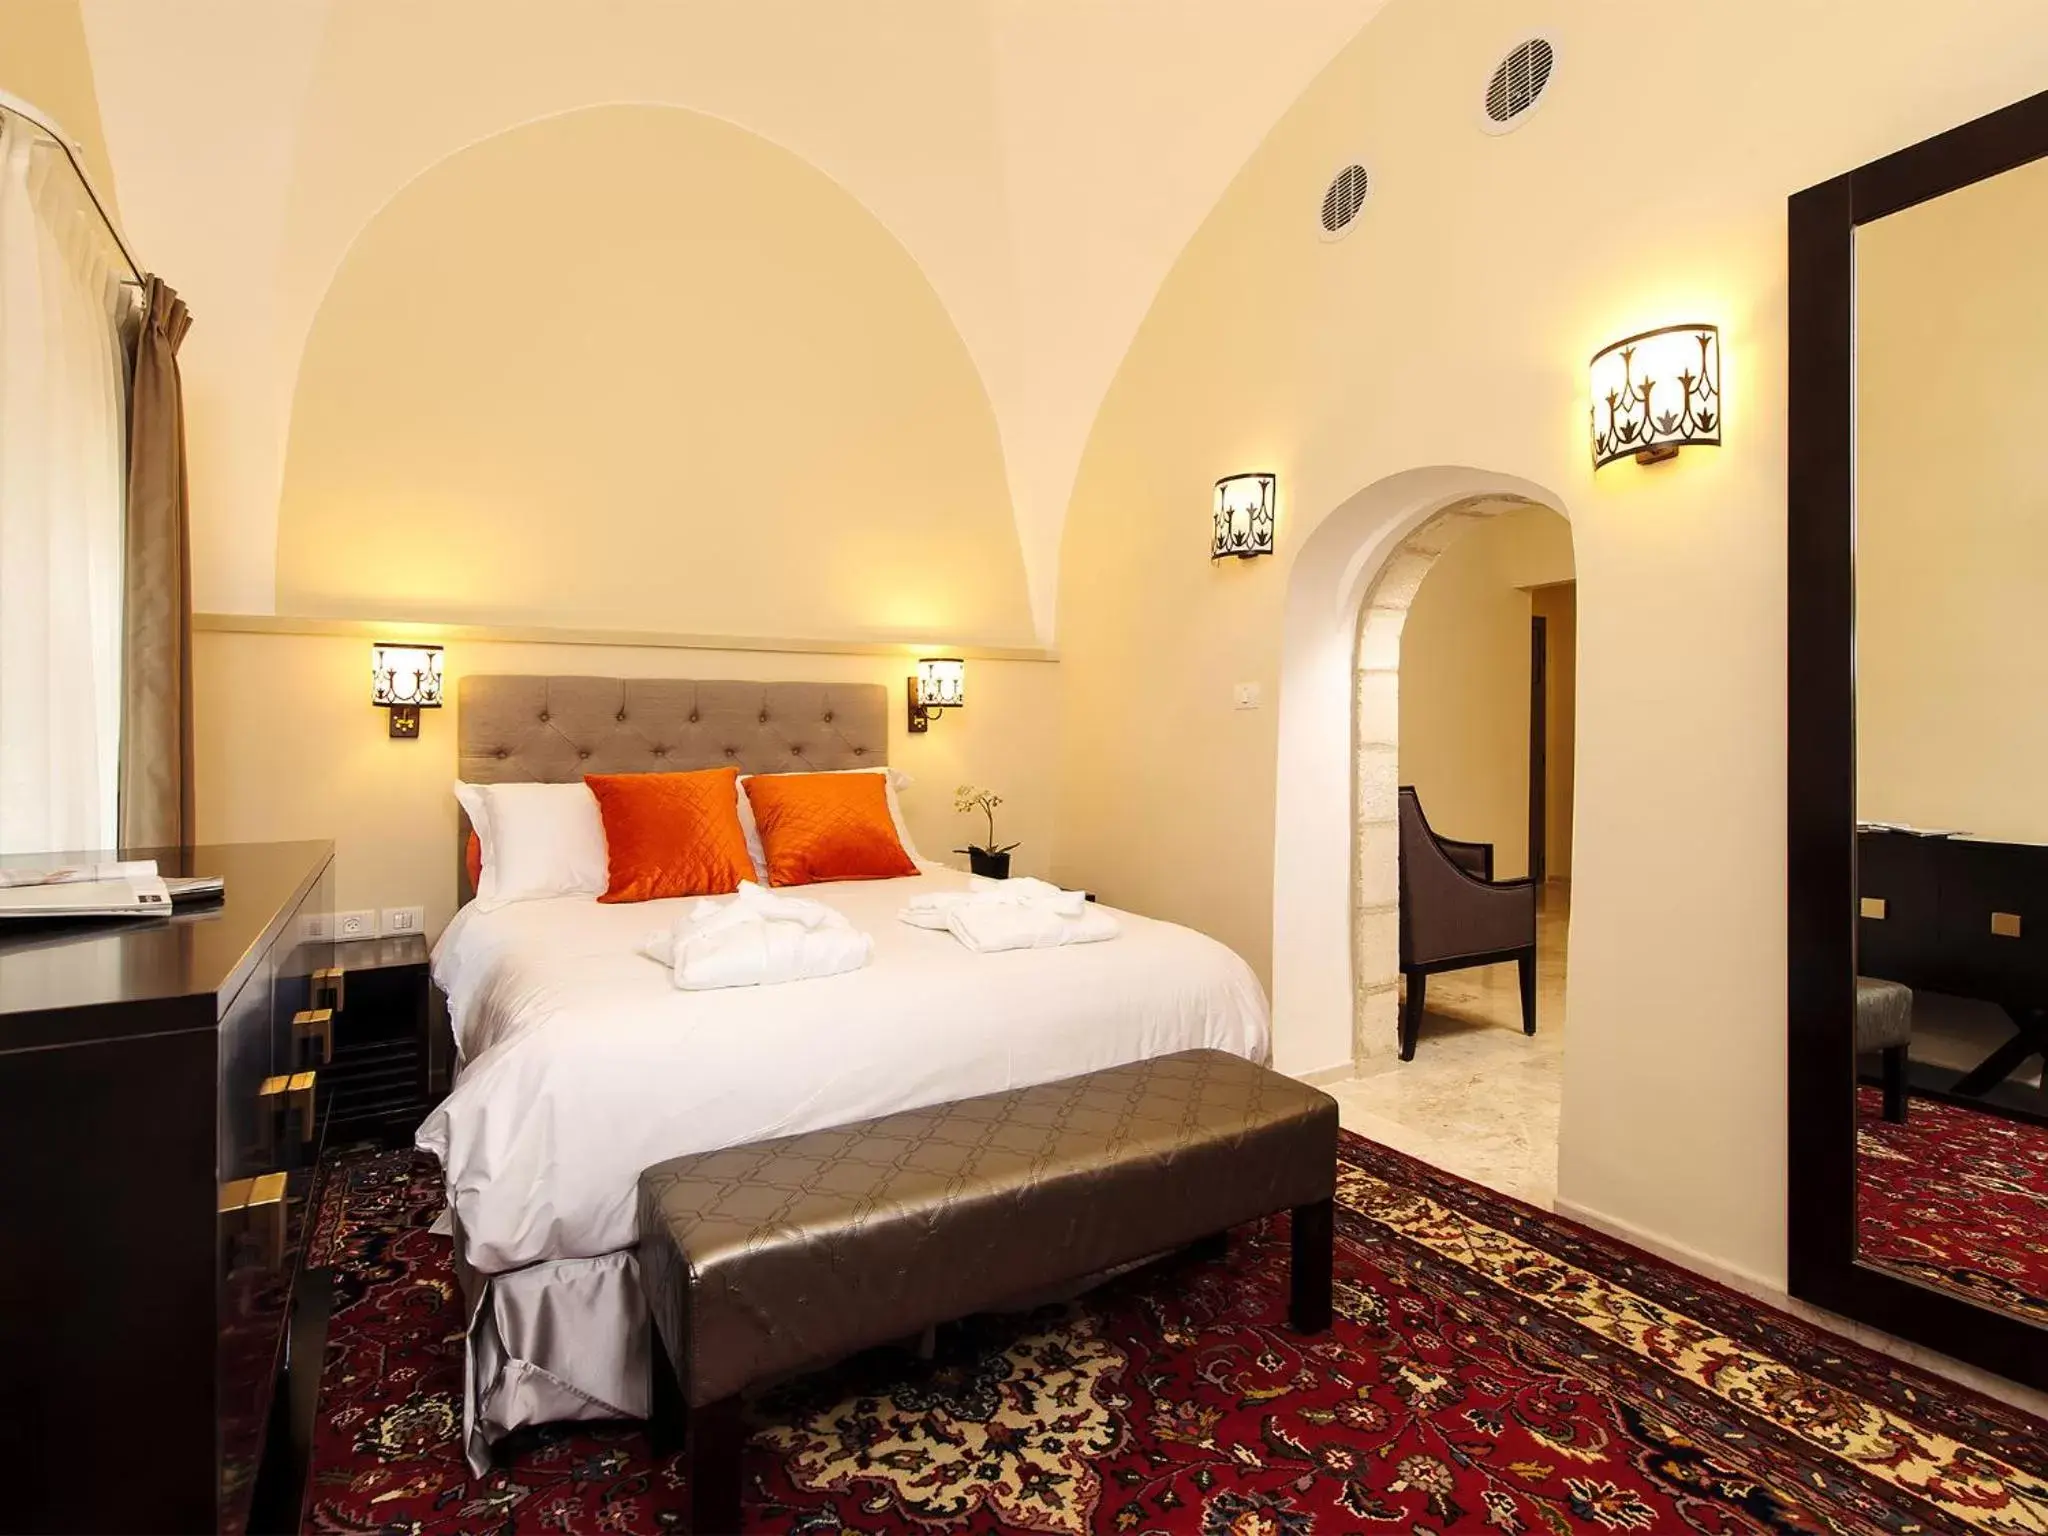 Junior Suite - single occupancy in The Sephardic House Hotel in The Jewish Quarter